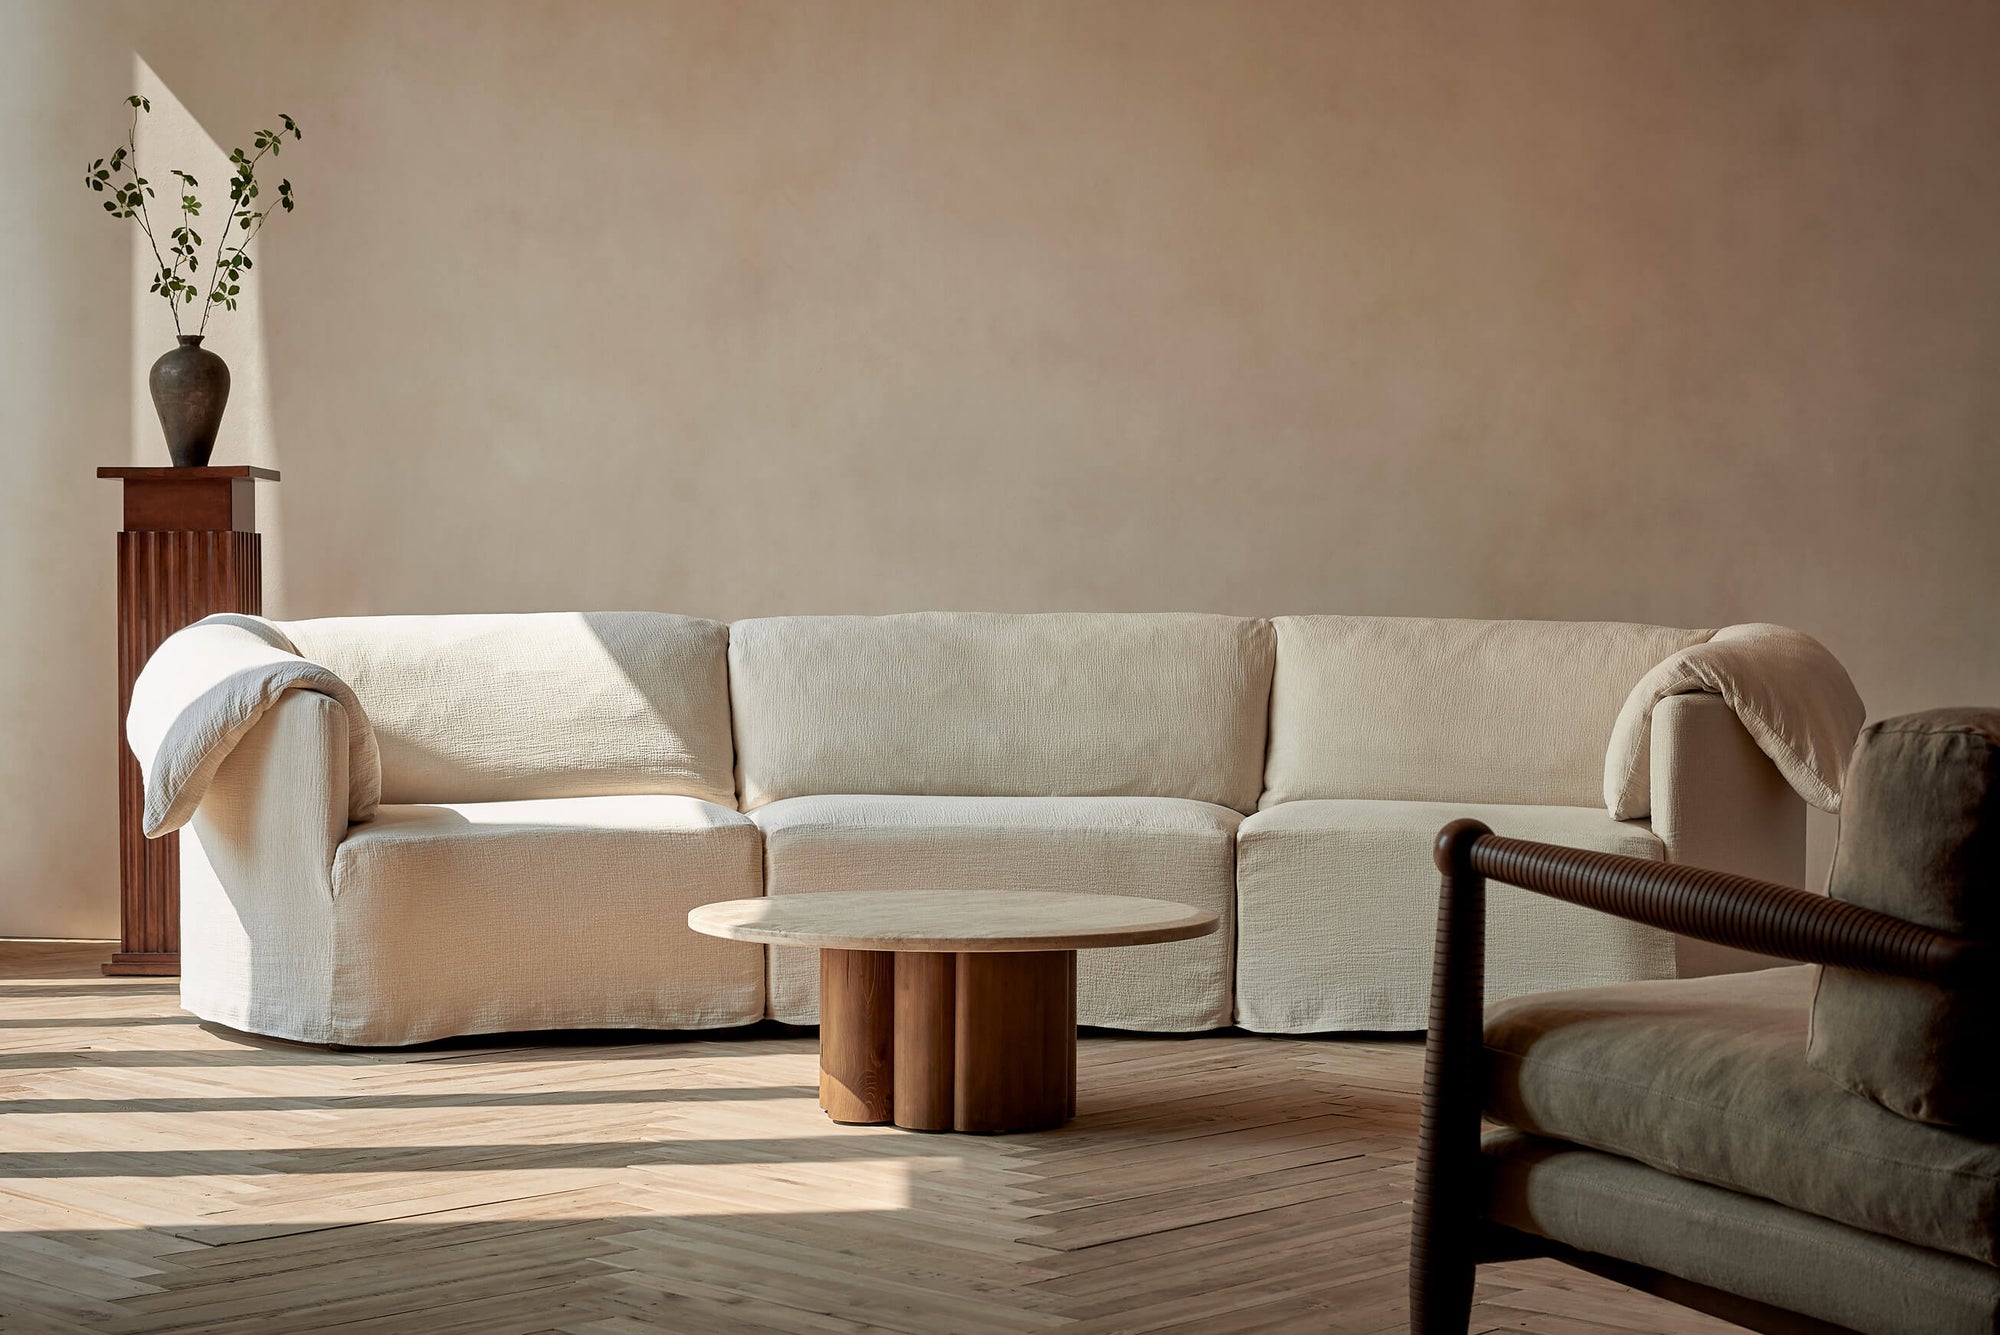 Loula Sectional Sofa in Corn Silk, a light beige Washed Cotton Linen, placed in a sunlit room with the Enzo Coffee Table